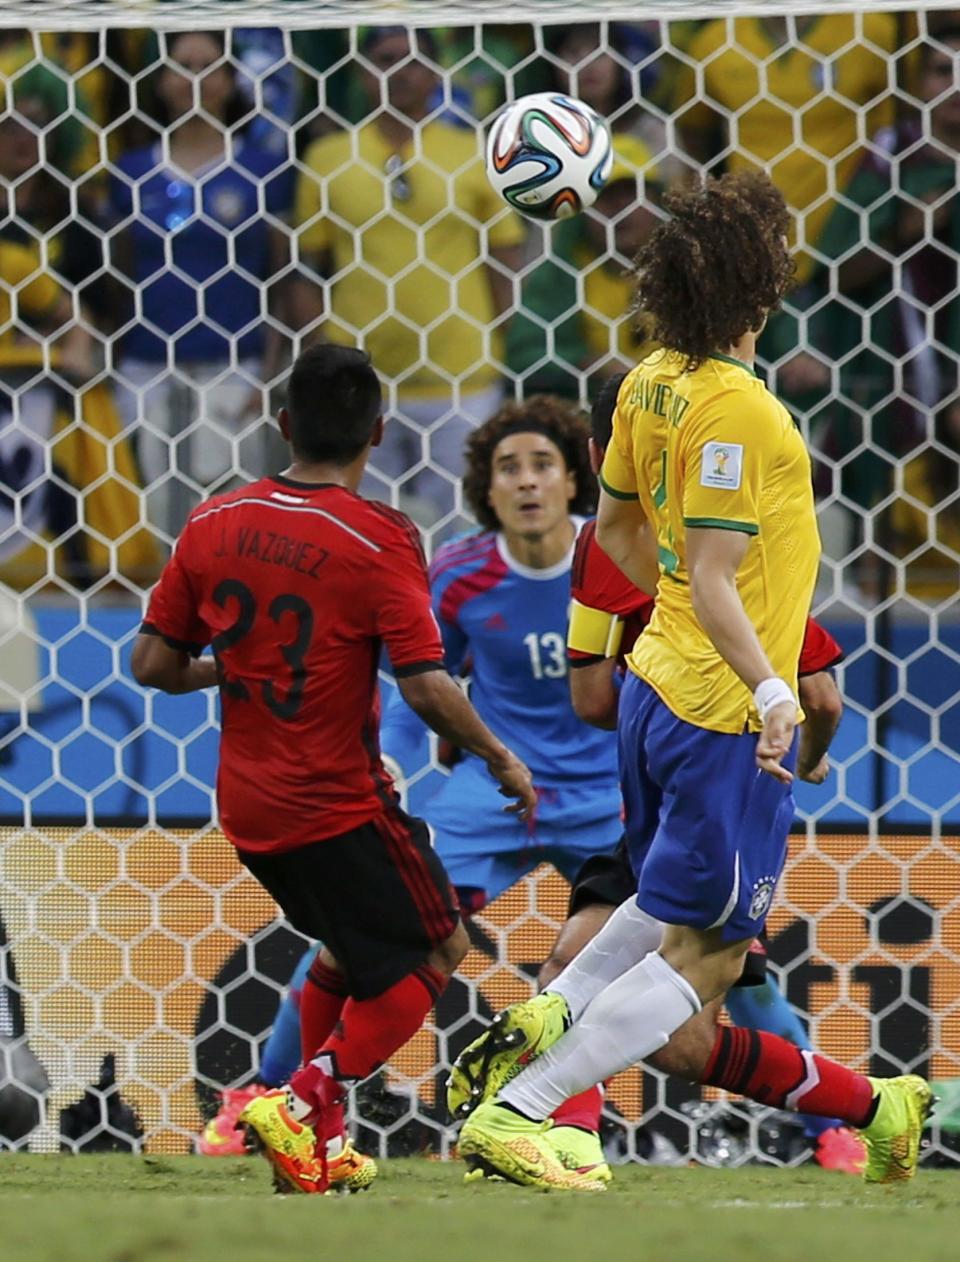 Mexico's goalkeeper Guillermo Ochoa prepares to make a save during the 2014 World Cup Group A soccer match between Brazil and Mexico at the Castelao arena in Fortaleza June 17, 2014. (Sergio Moraes/Reuters)